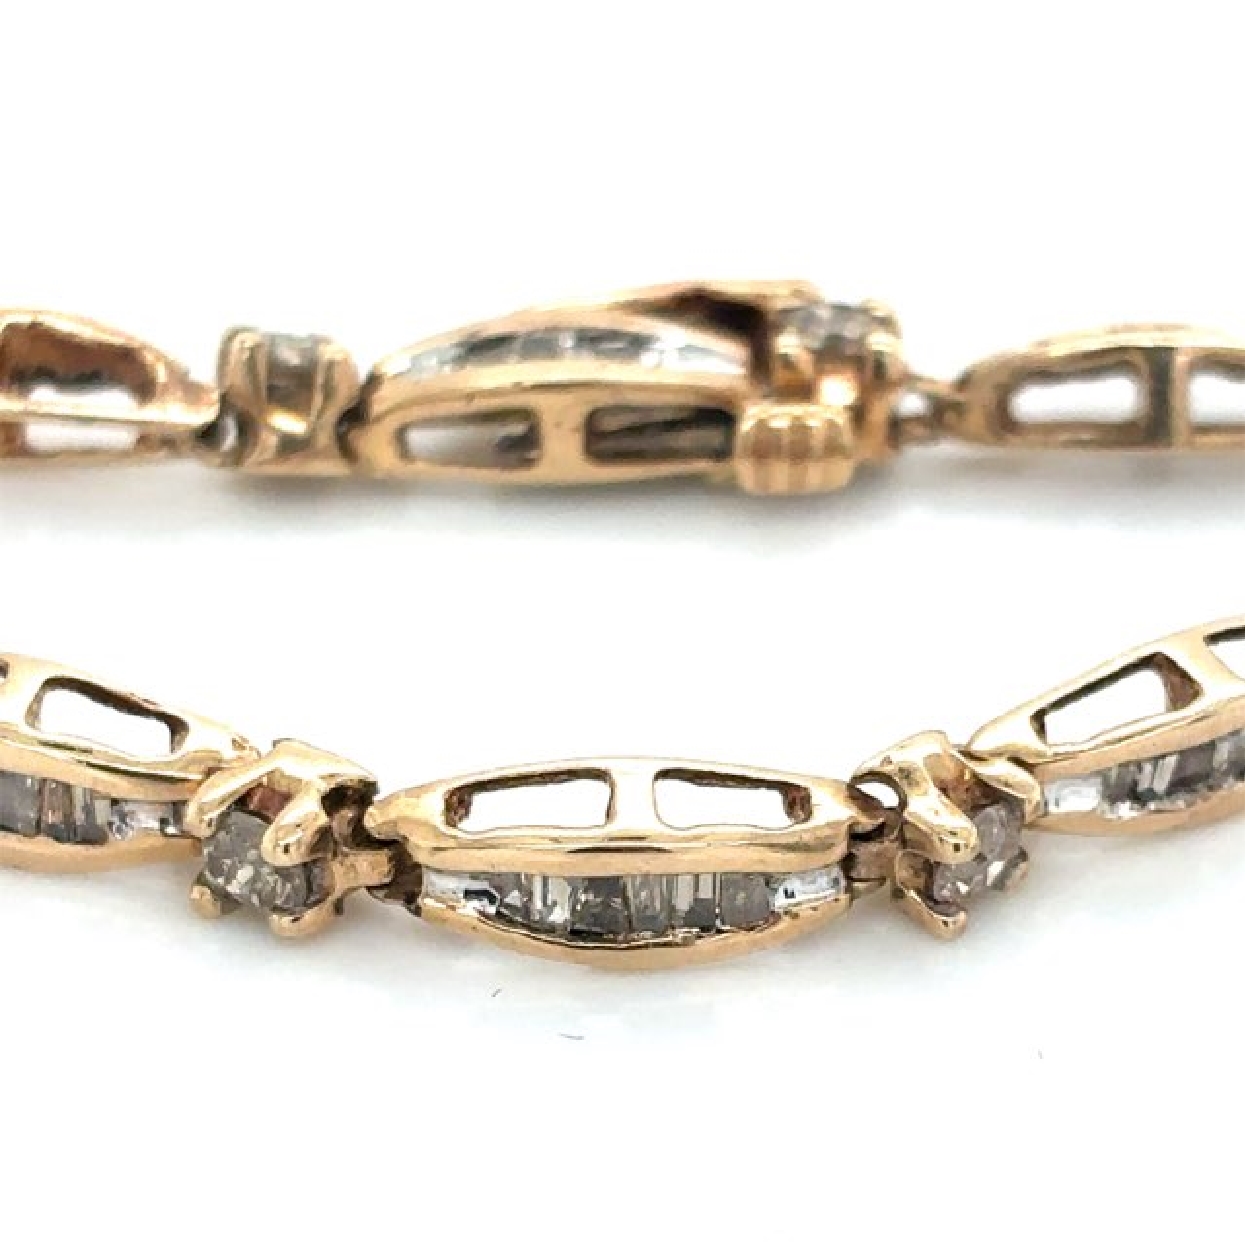 14K yellow gold diamond bracelet with rounds and baguettes. 7.5 inch.